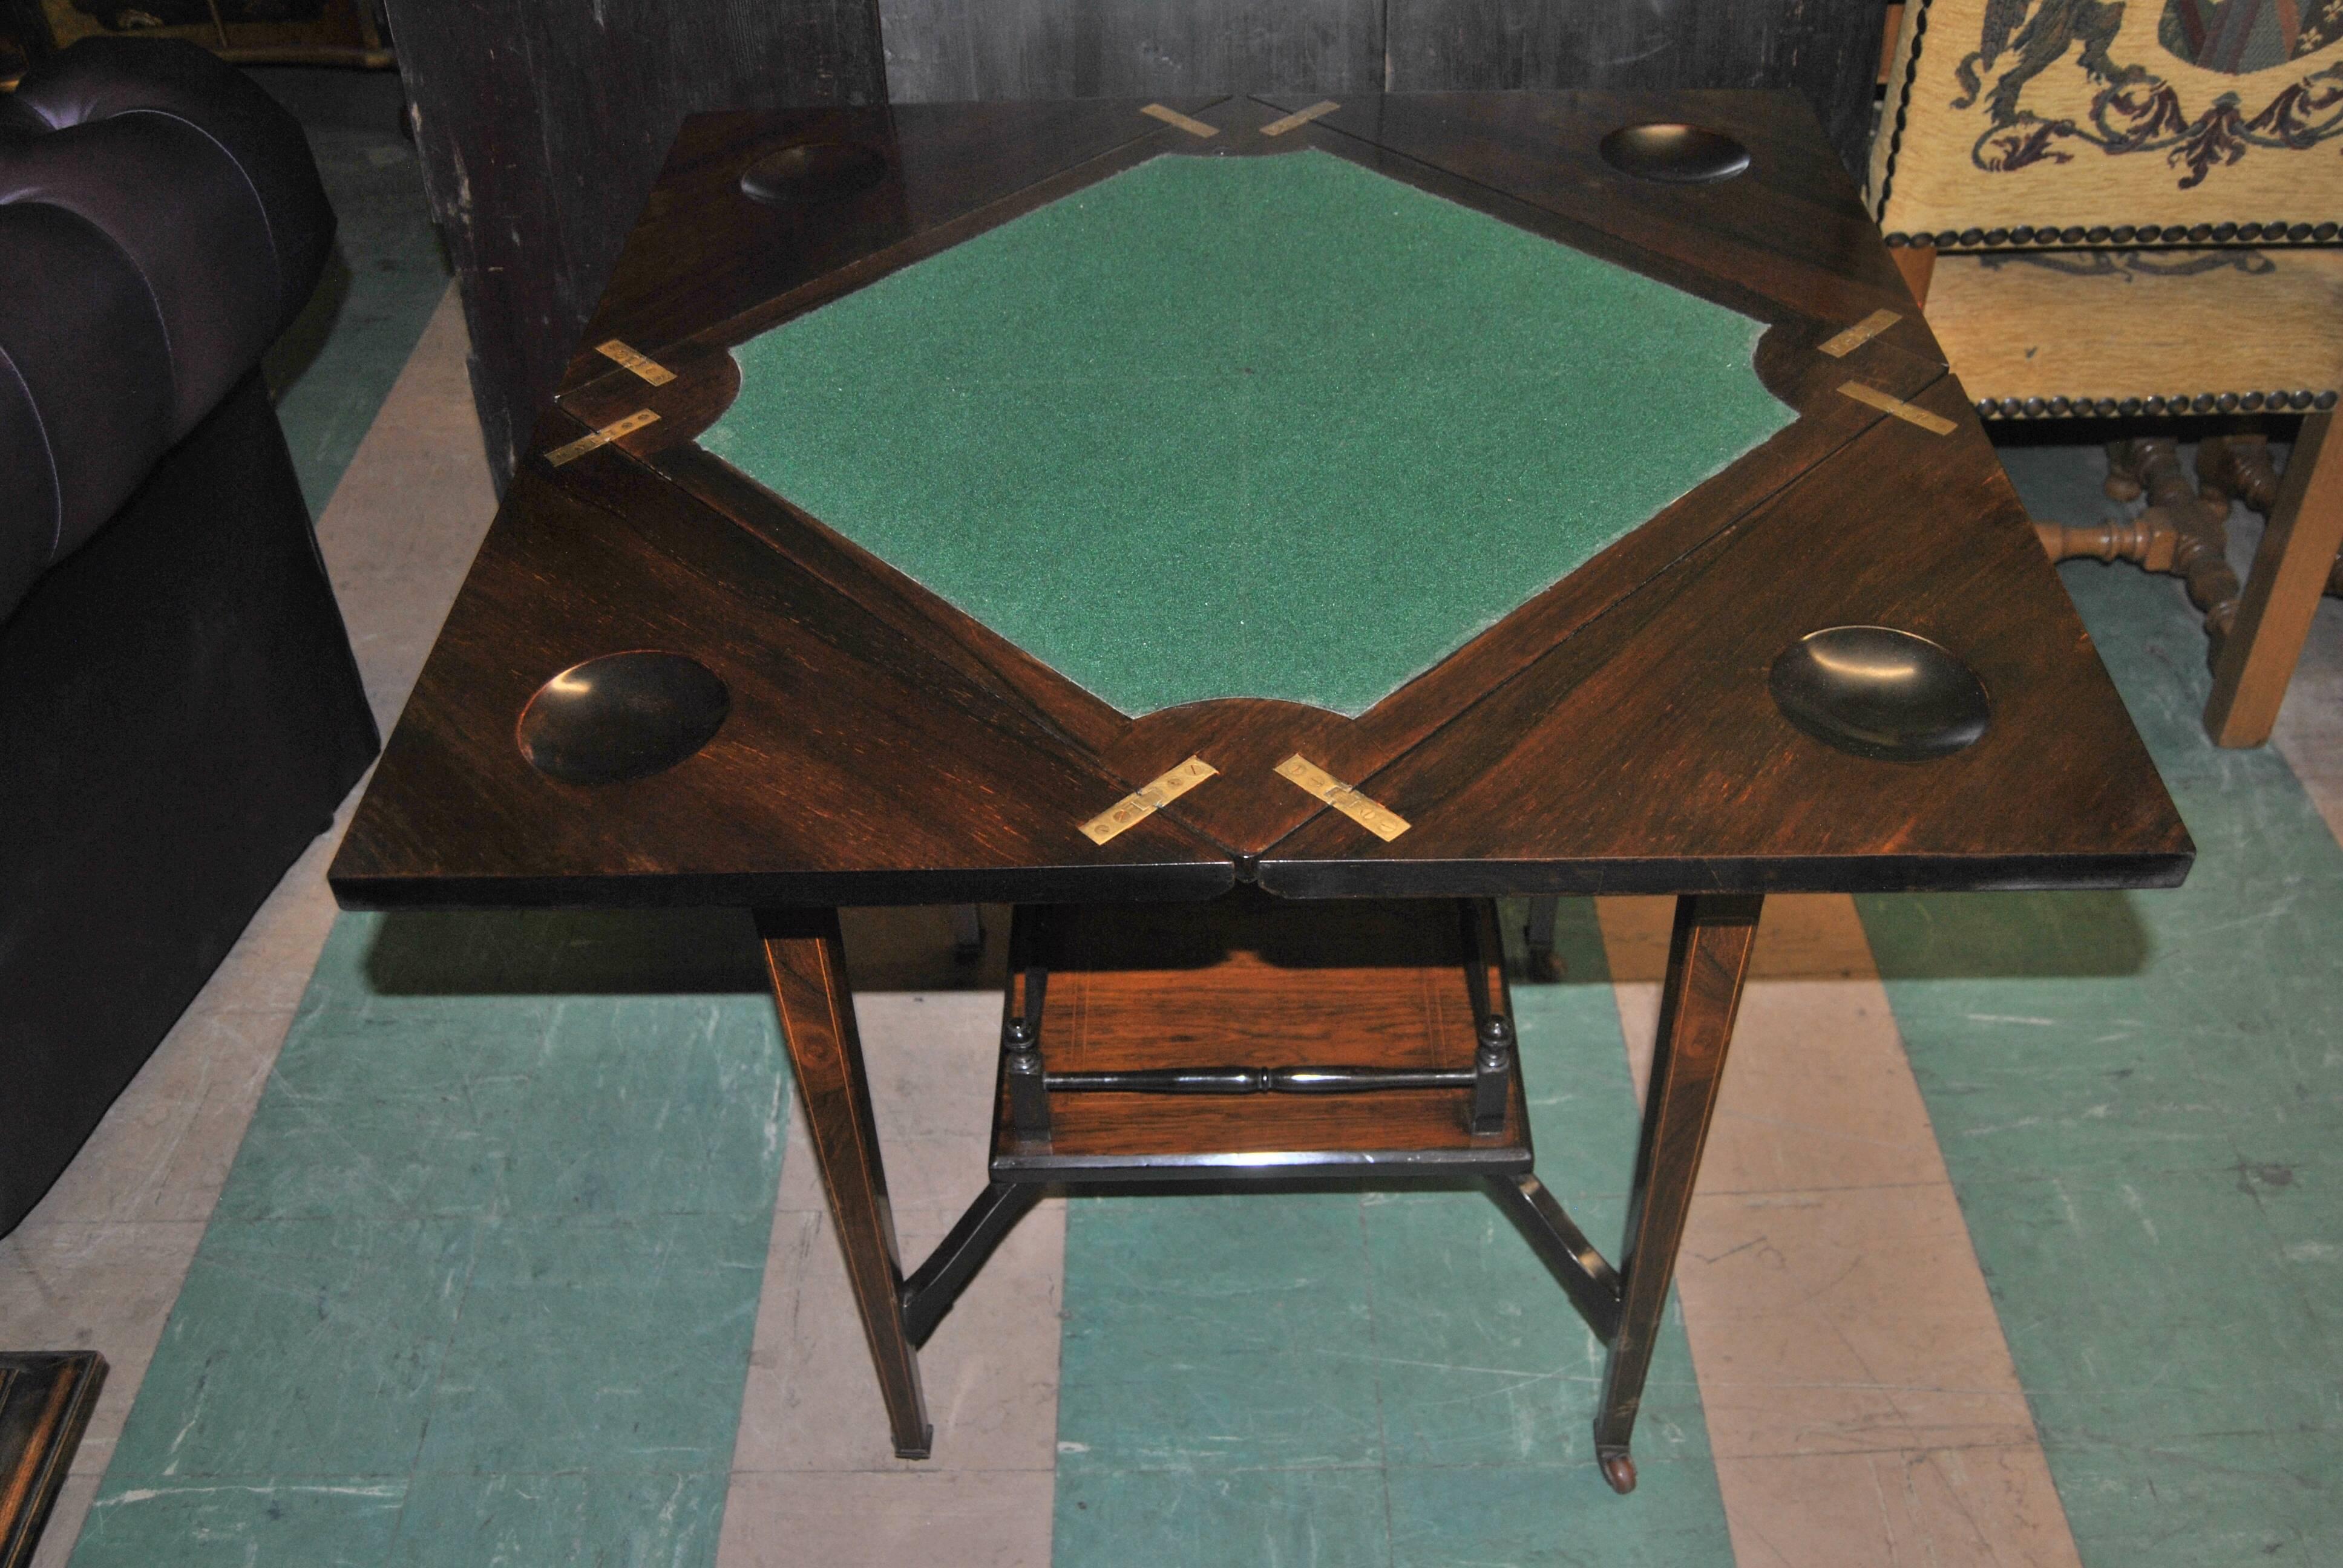 This is an envelope or game table made in England, circa 1900. It is made of the finest rosewood. Each quarter of the top and the drawer front is highly inlaid with the most beautiful, fabulous quality inlay imaginable. The top swivels so that each